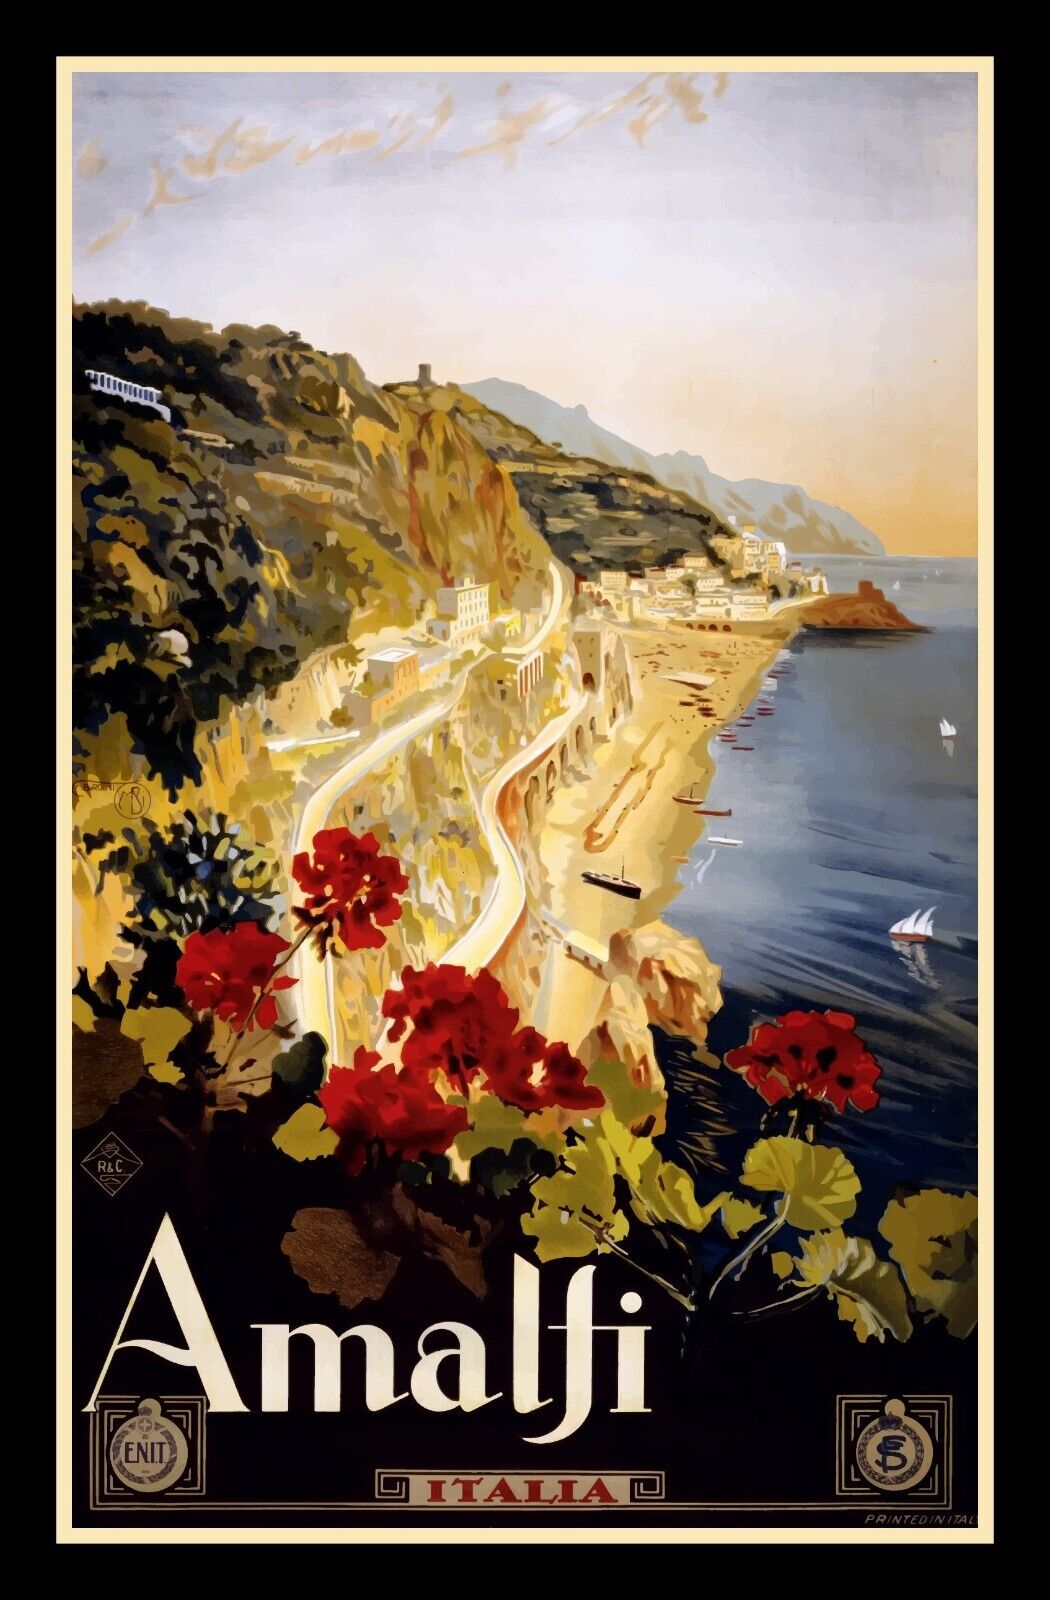 Amalfi Italy - Vintage Travel Poster Image - BIG MAGNET 3.5 x 5 in